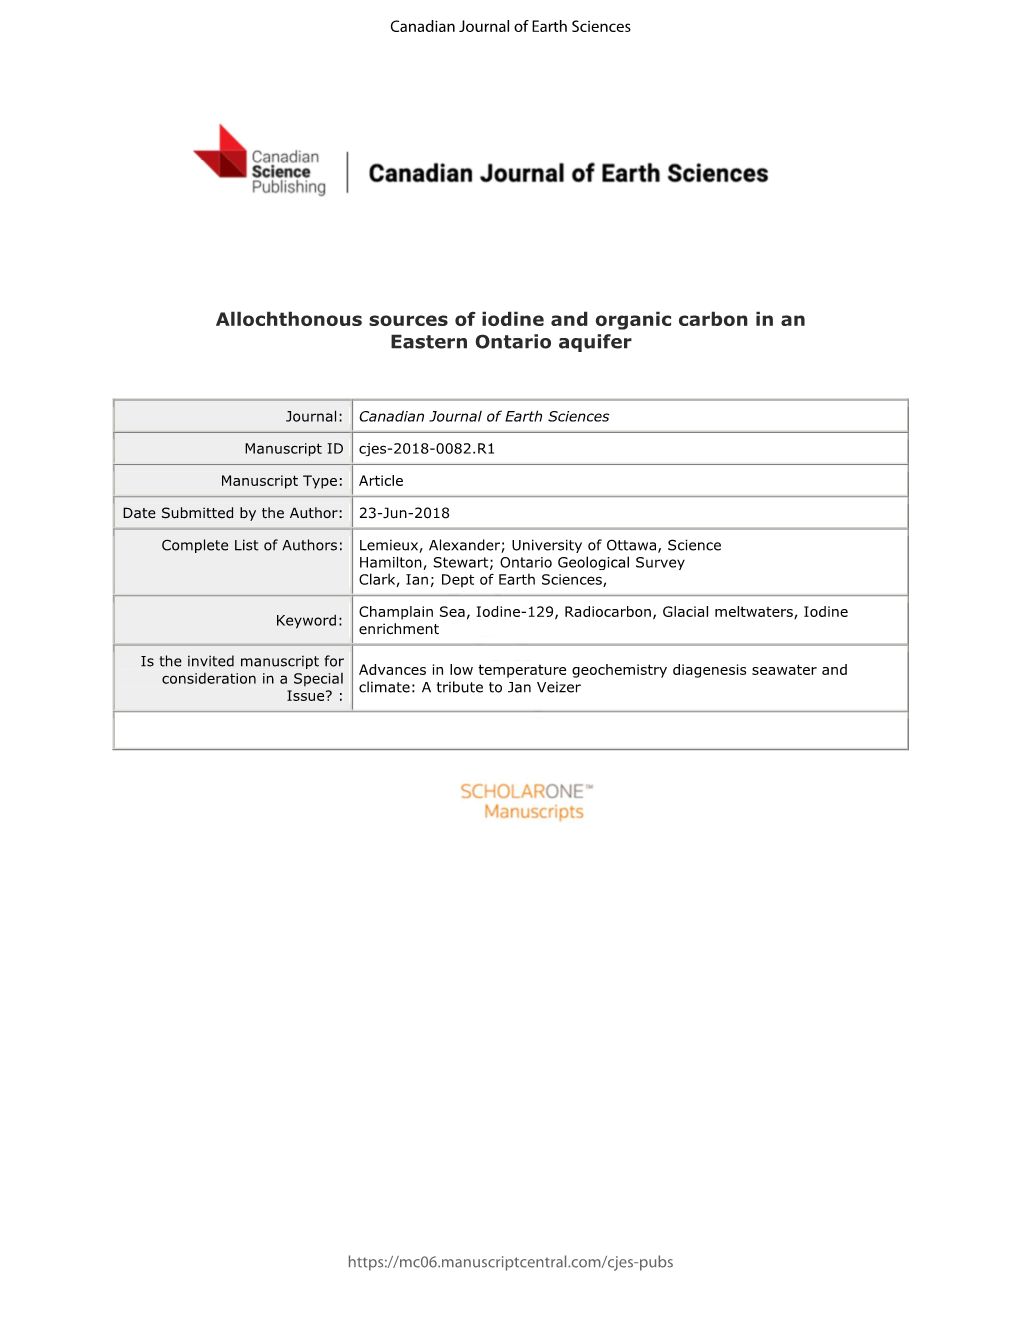 Allochthonous Sources of Iodine and Organic Carbon in an Eastern Ontario Aquifer